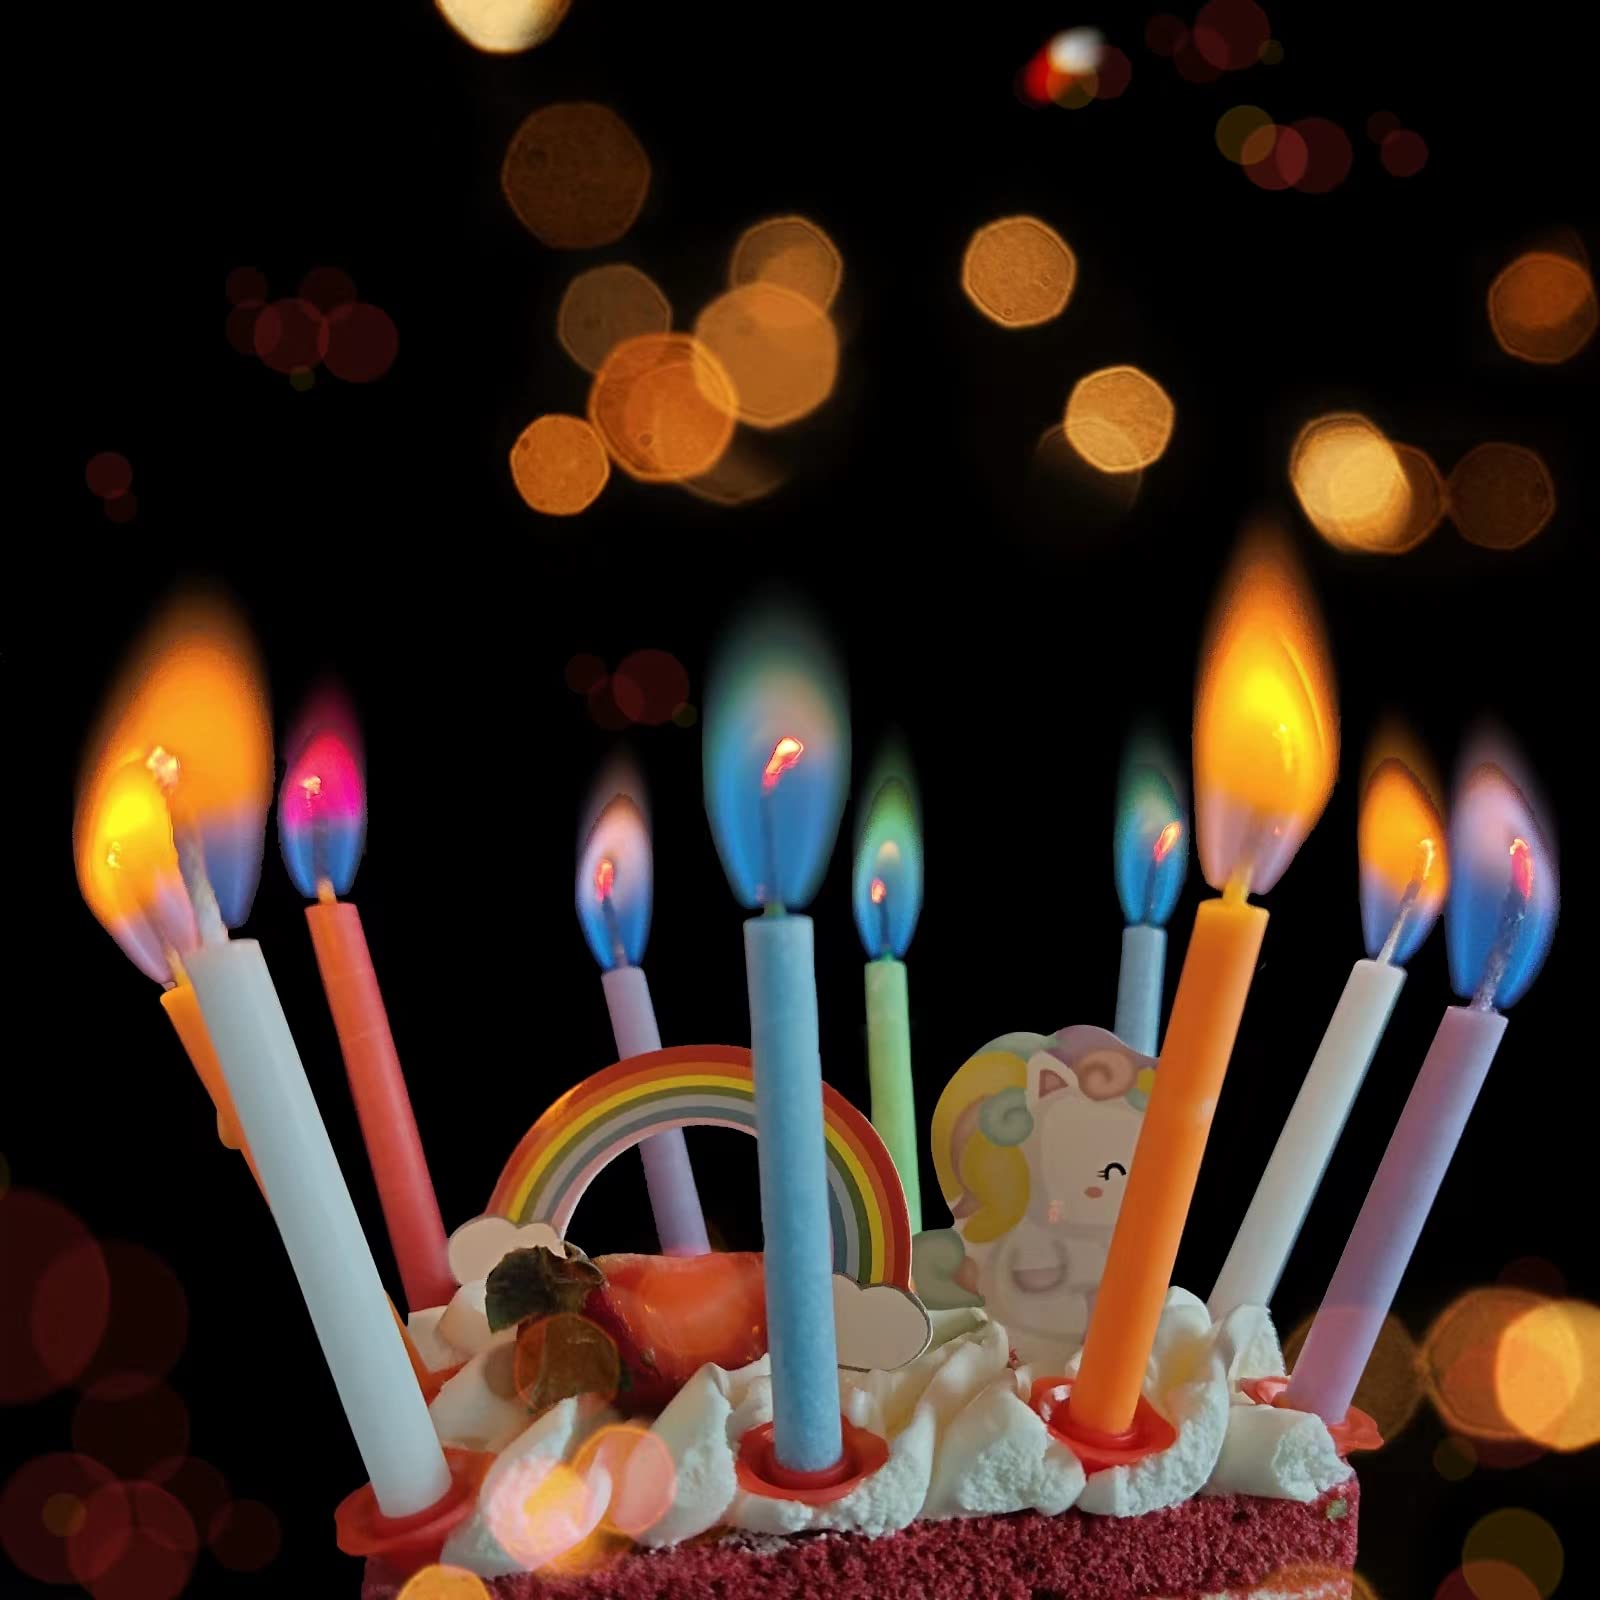 Flameless Birthday Candles: Safe and Convenient Options for Kids’ Parties插图